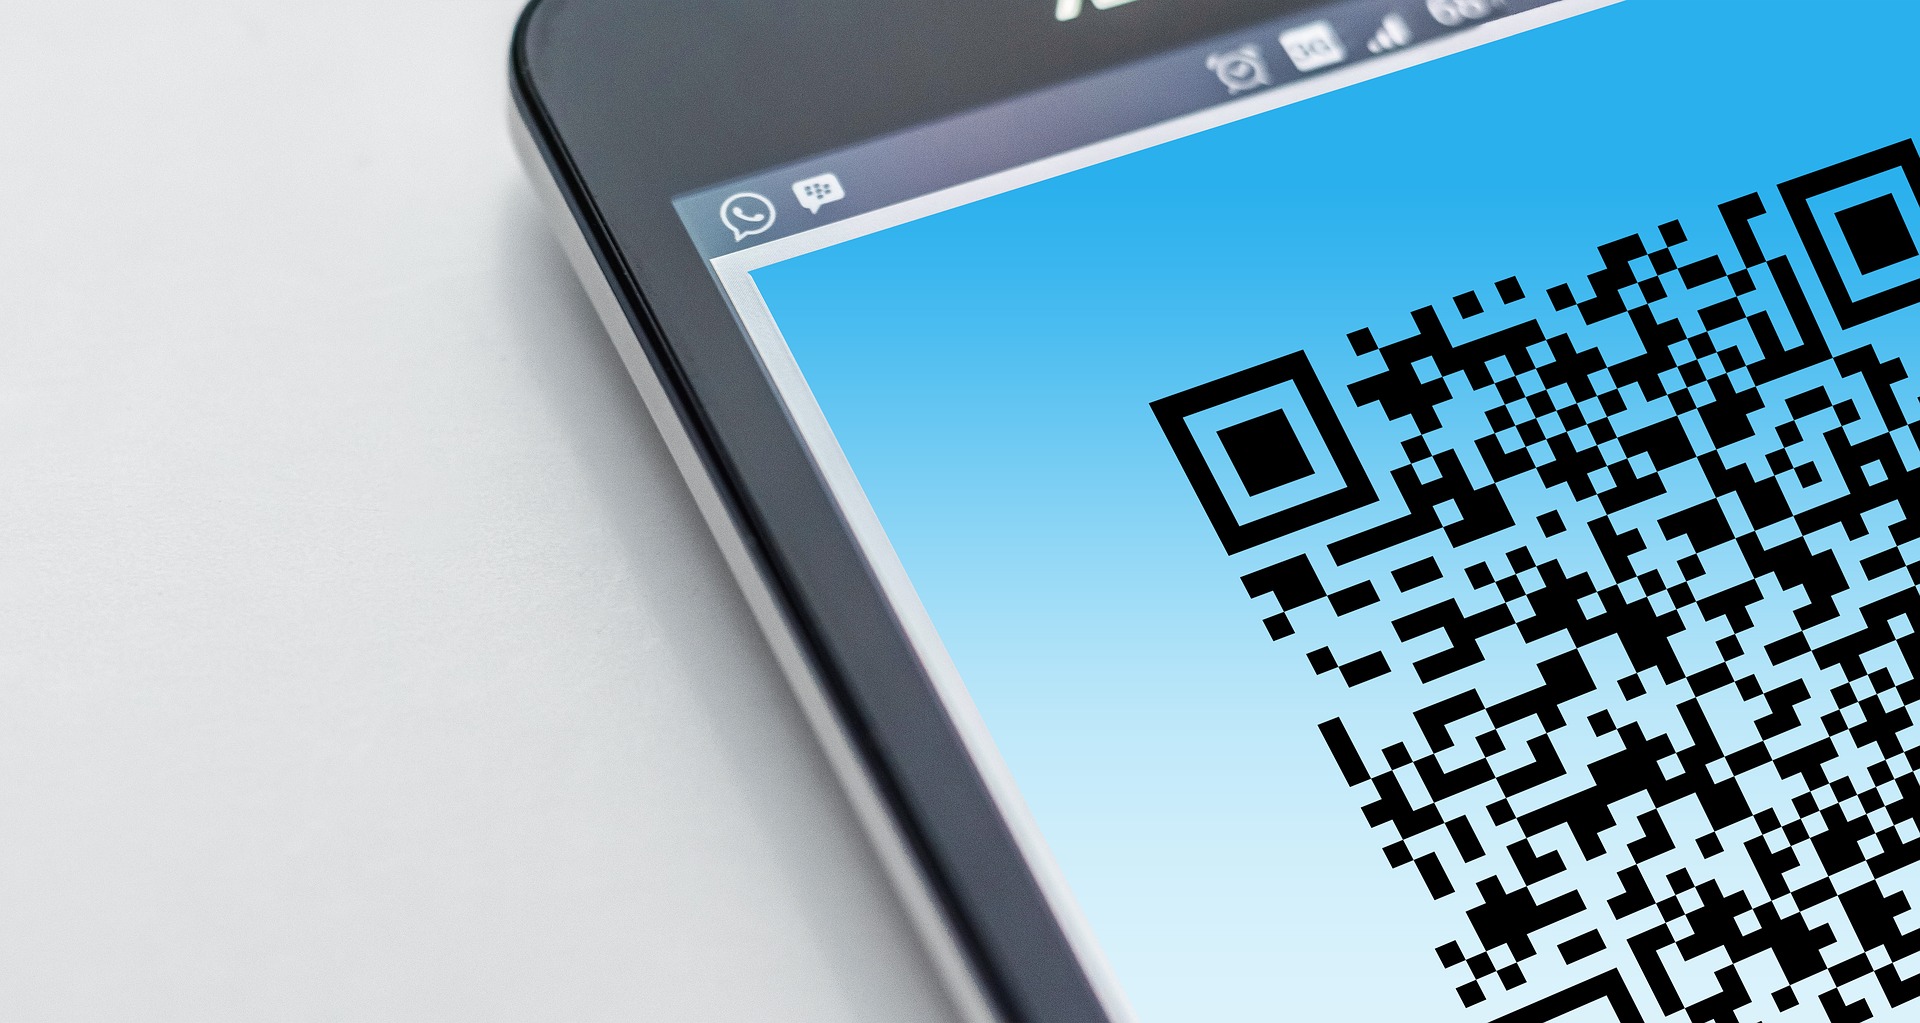 How can you utilize a QR code scanner in a web app?